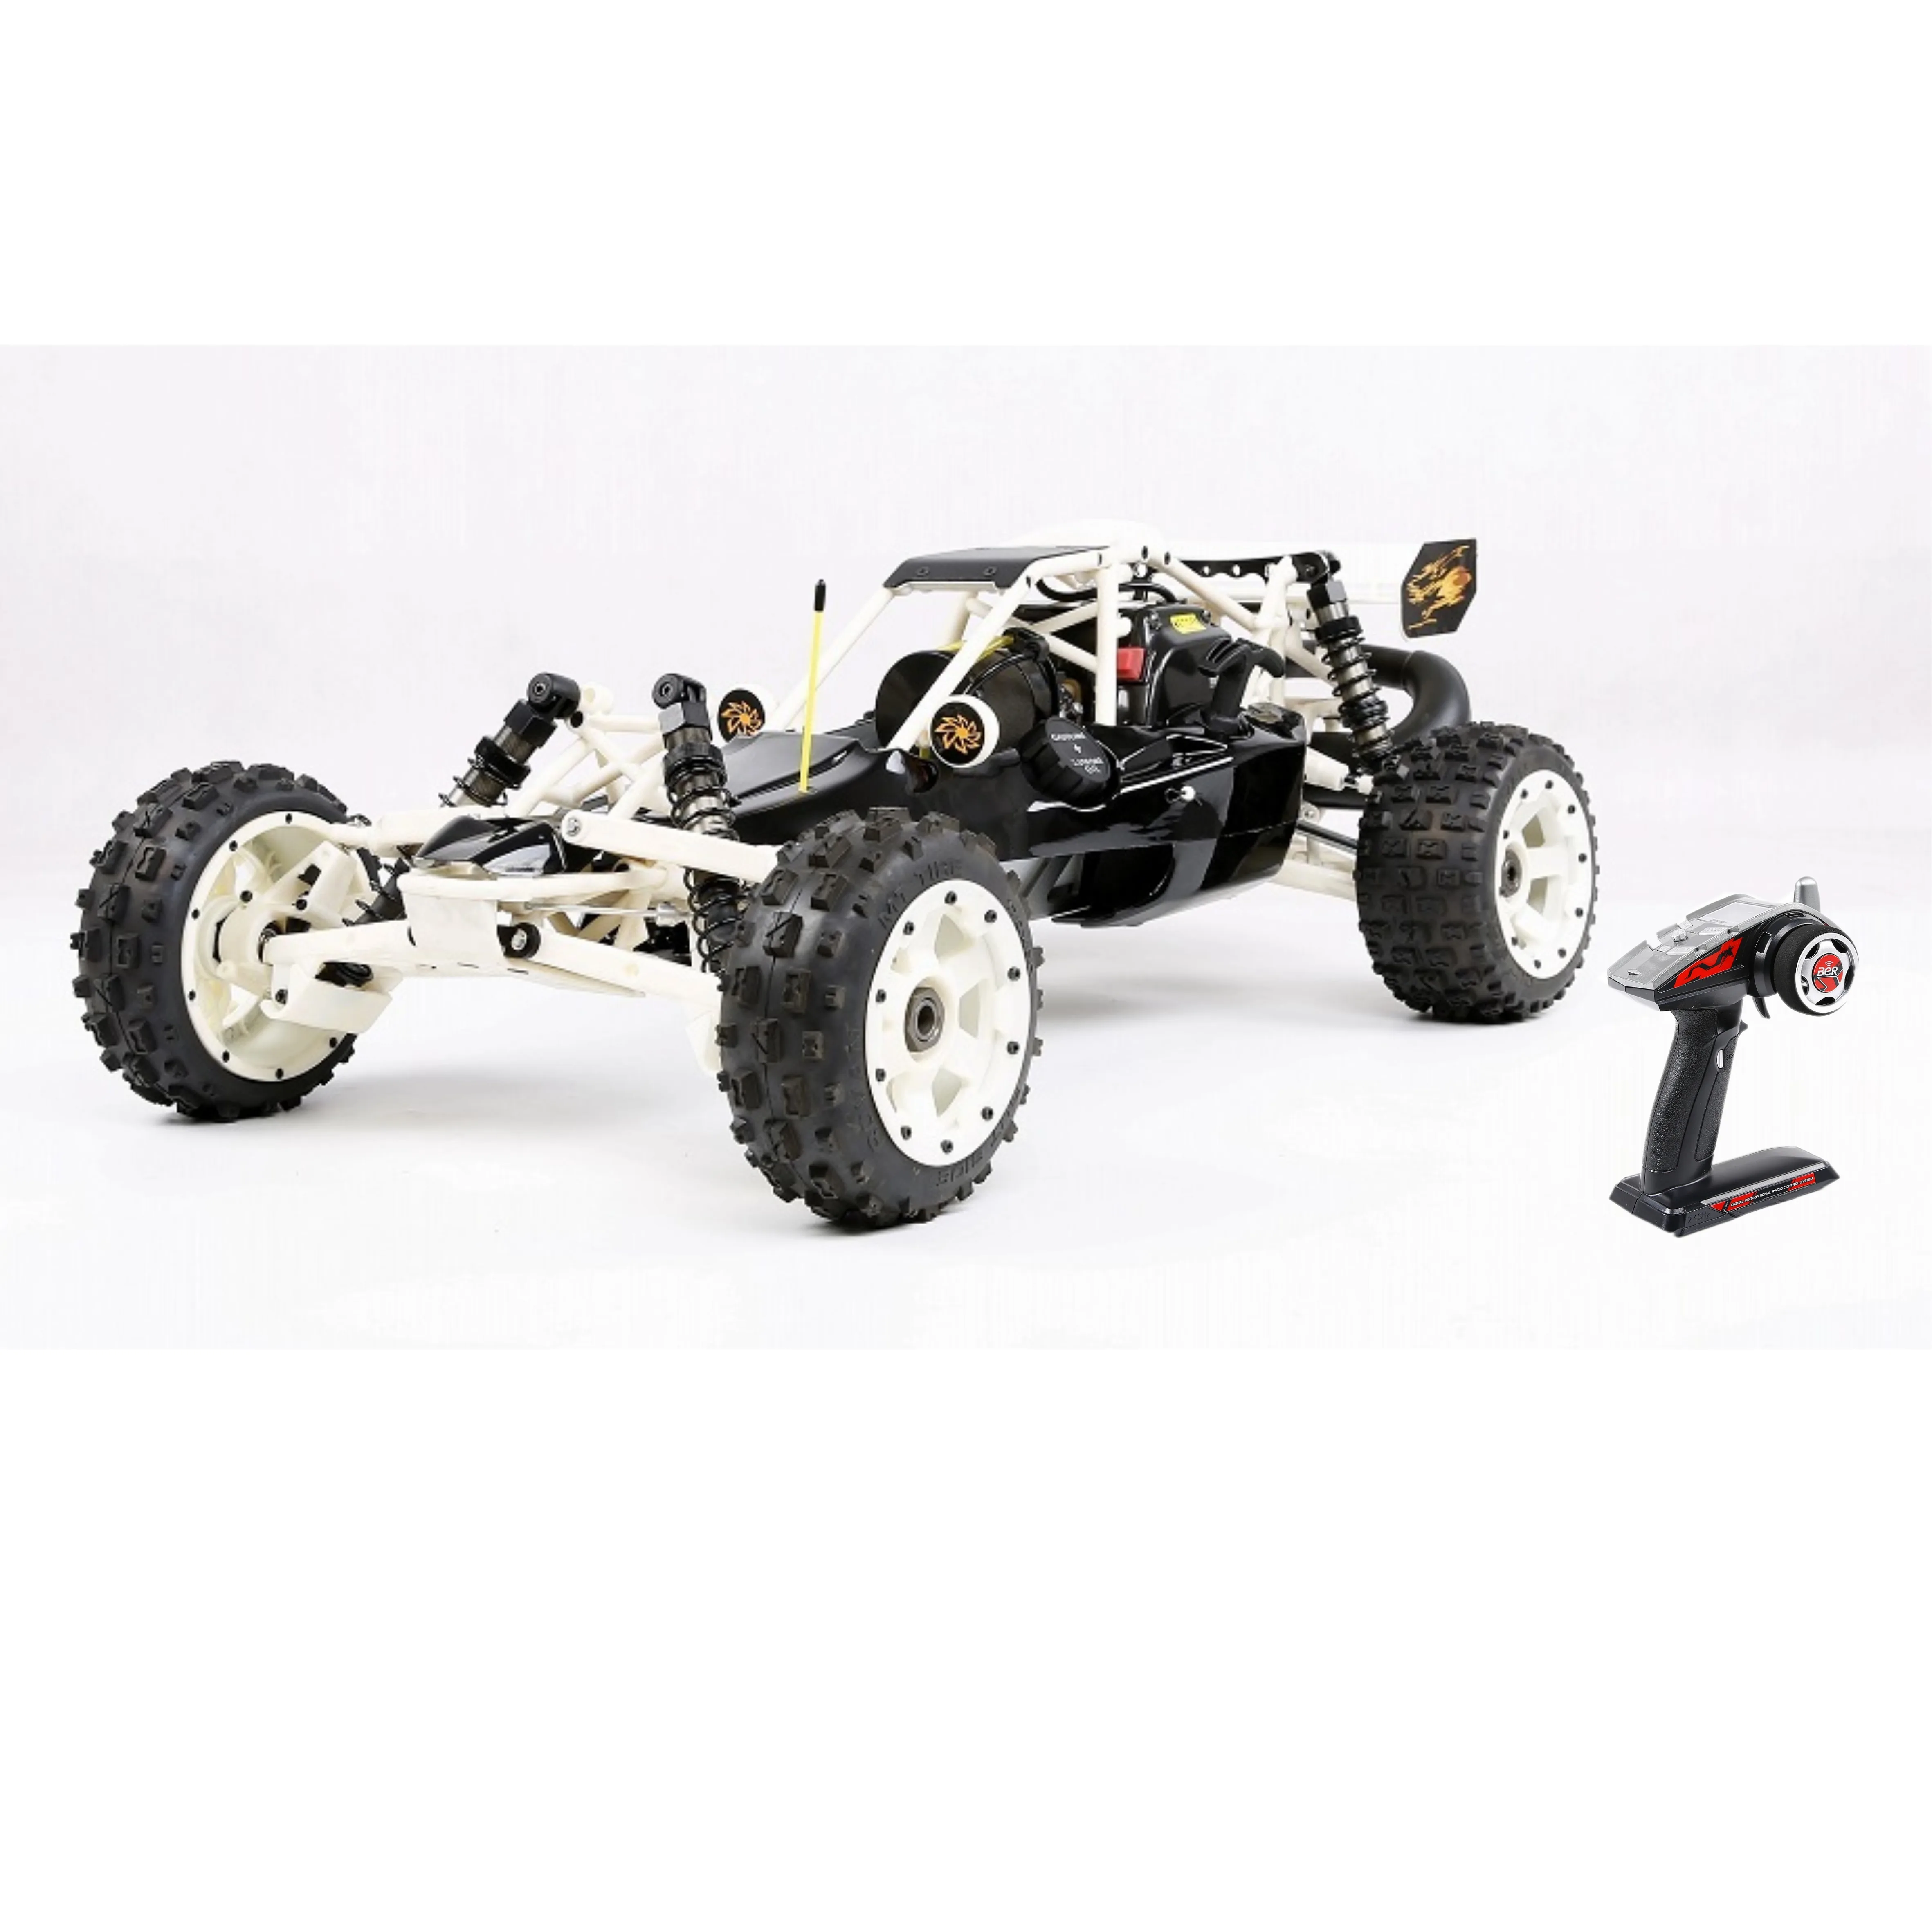 

Free Delivery ROFUN BAHA320c 1/5 Proportion RC Car 2021 New Launch New Design The Ultimate Speed